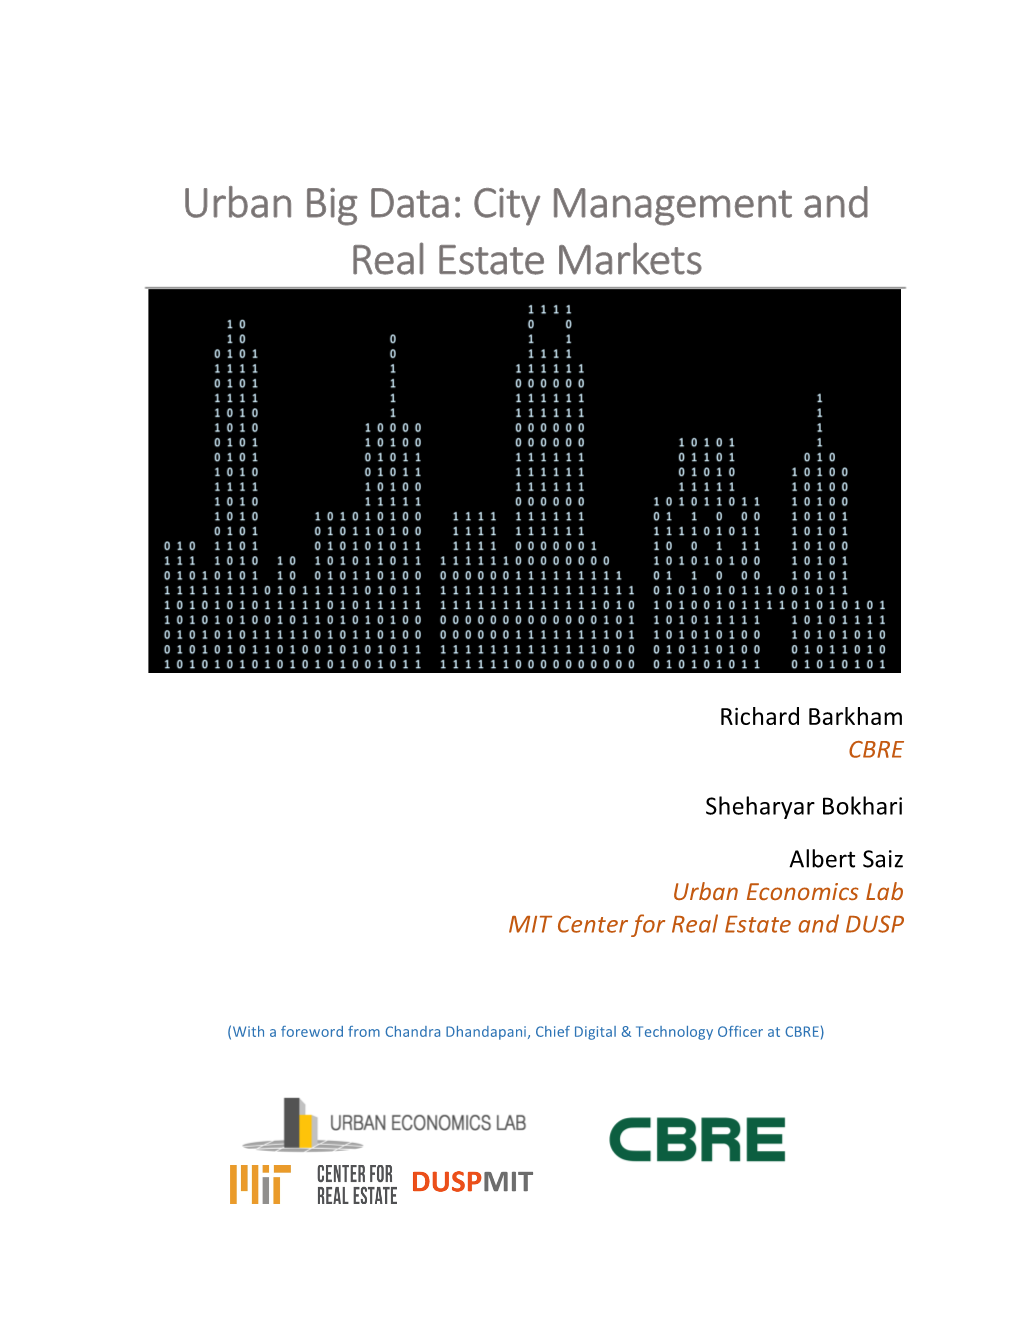 Urban Big Data: City Management and Real Estate Markets